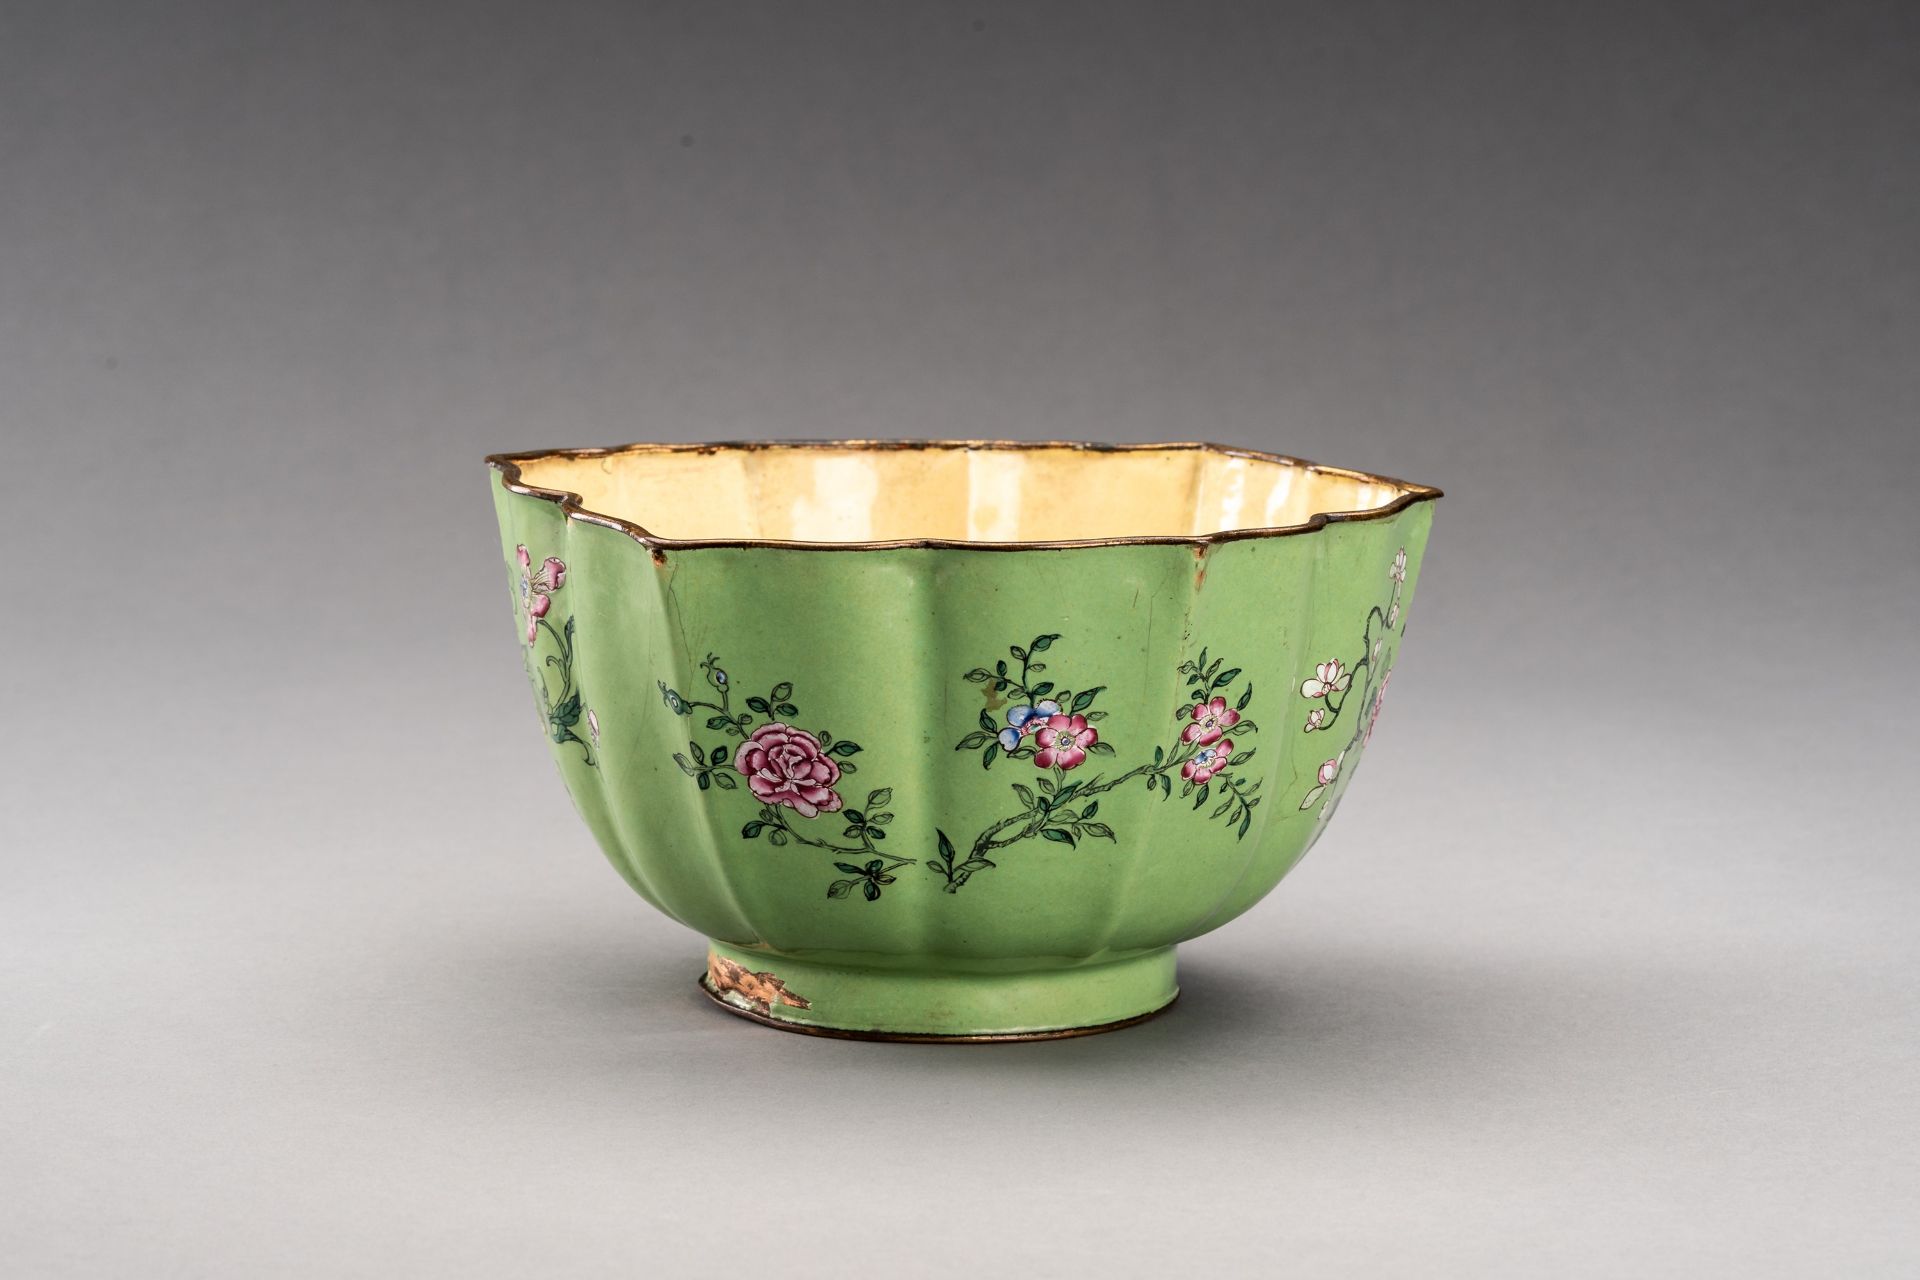 A LARGE LOBED CANTON ENAMEL BOWL, QING - Image 5 of 7